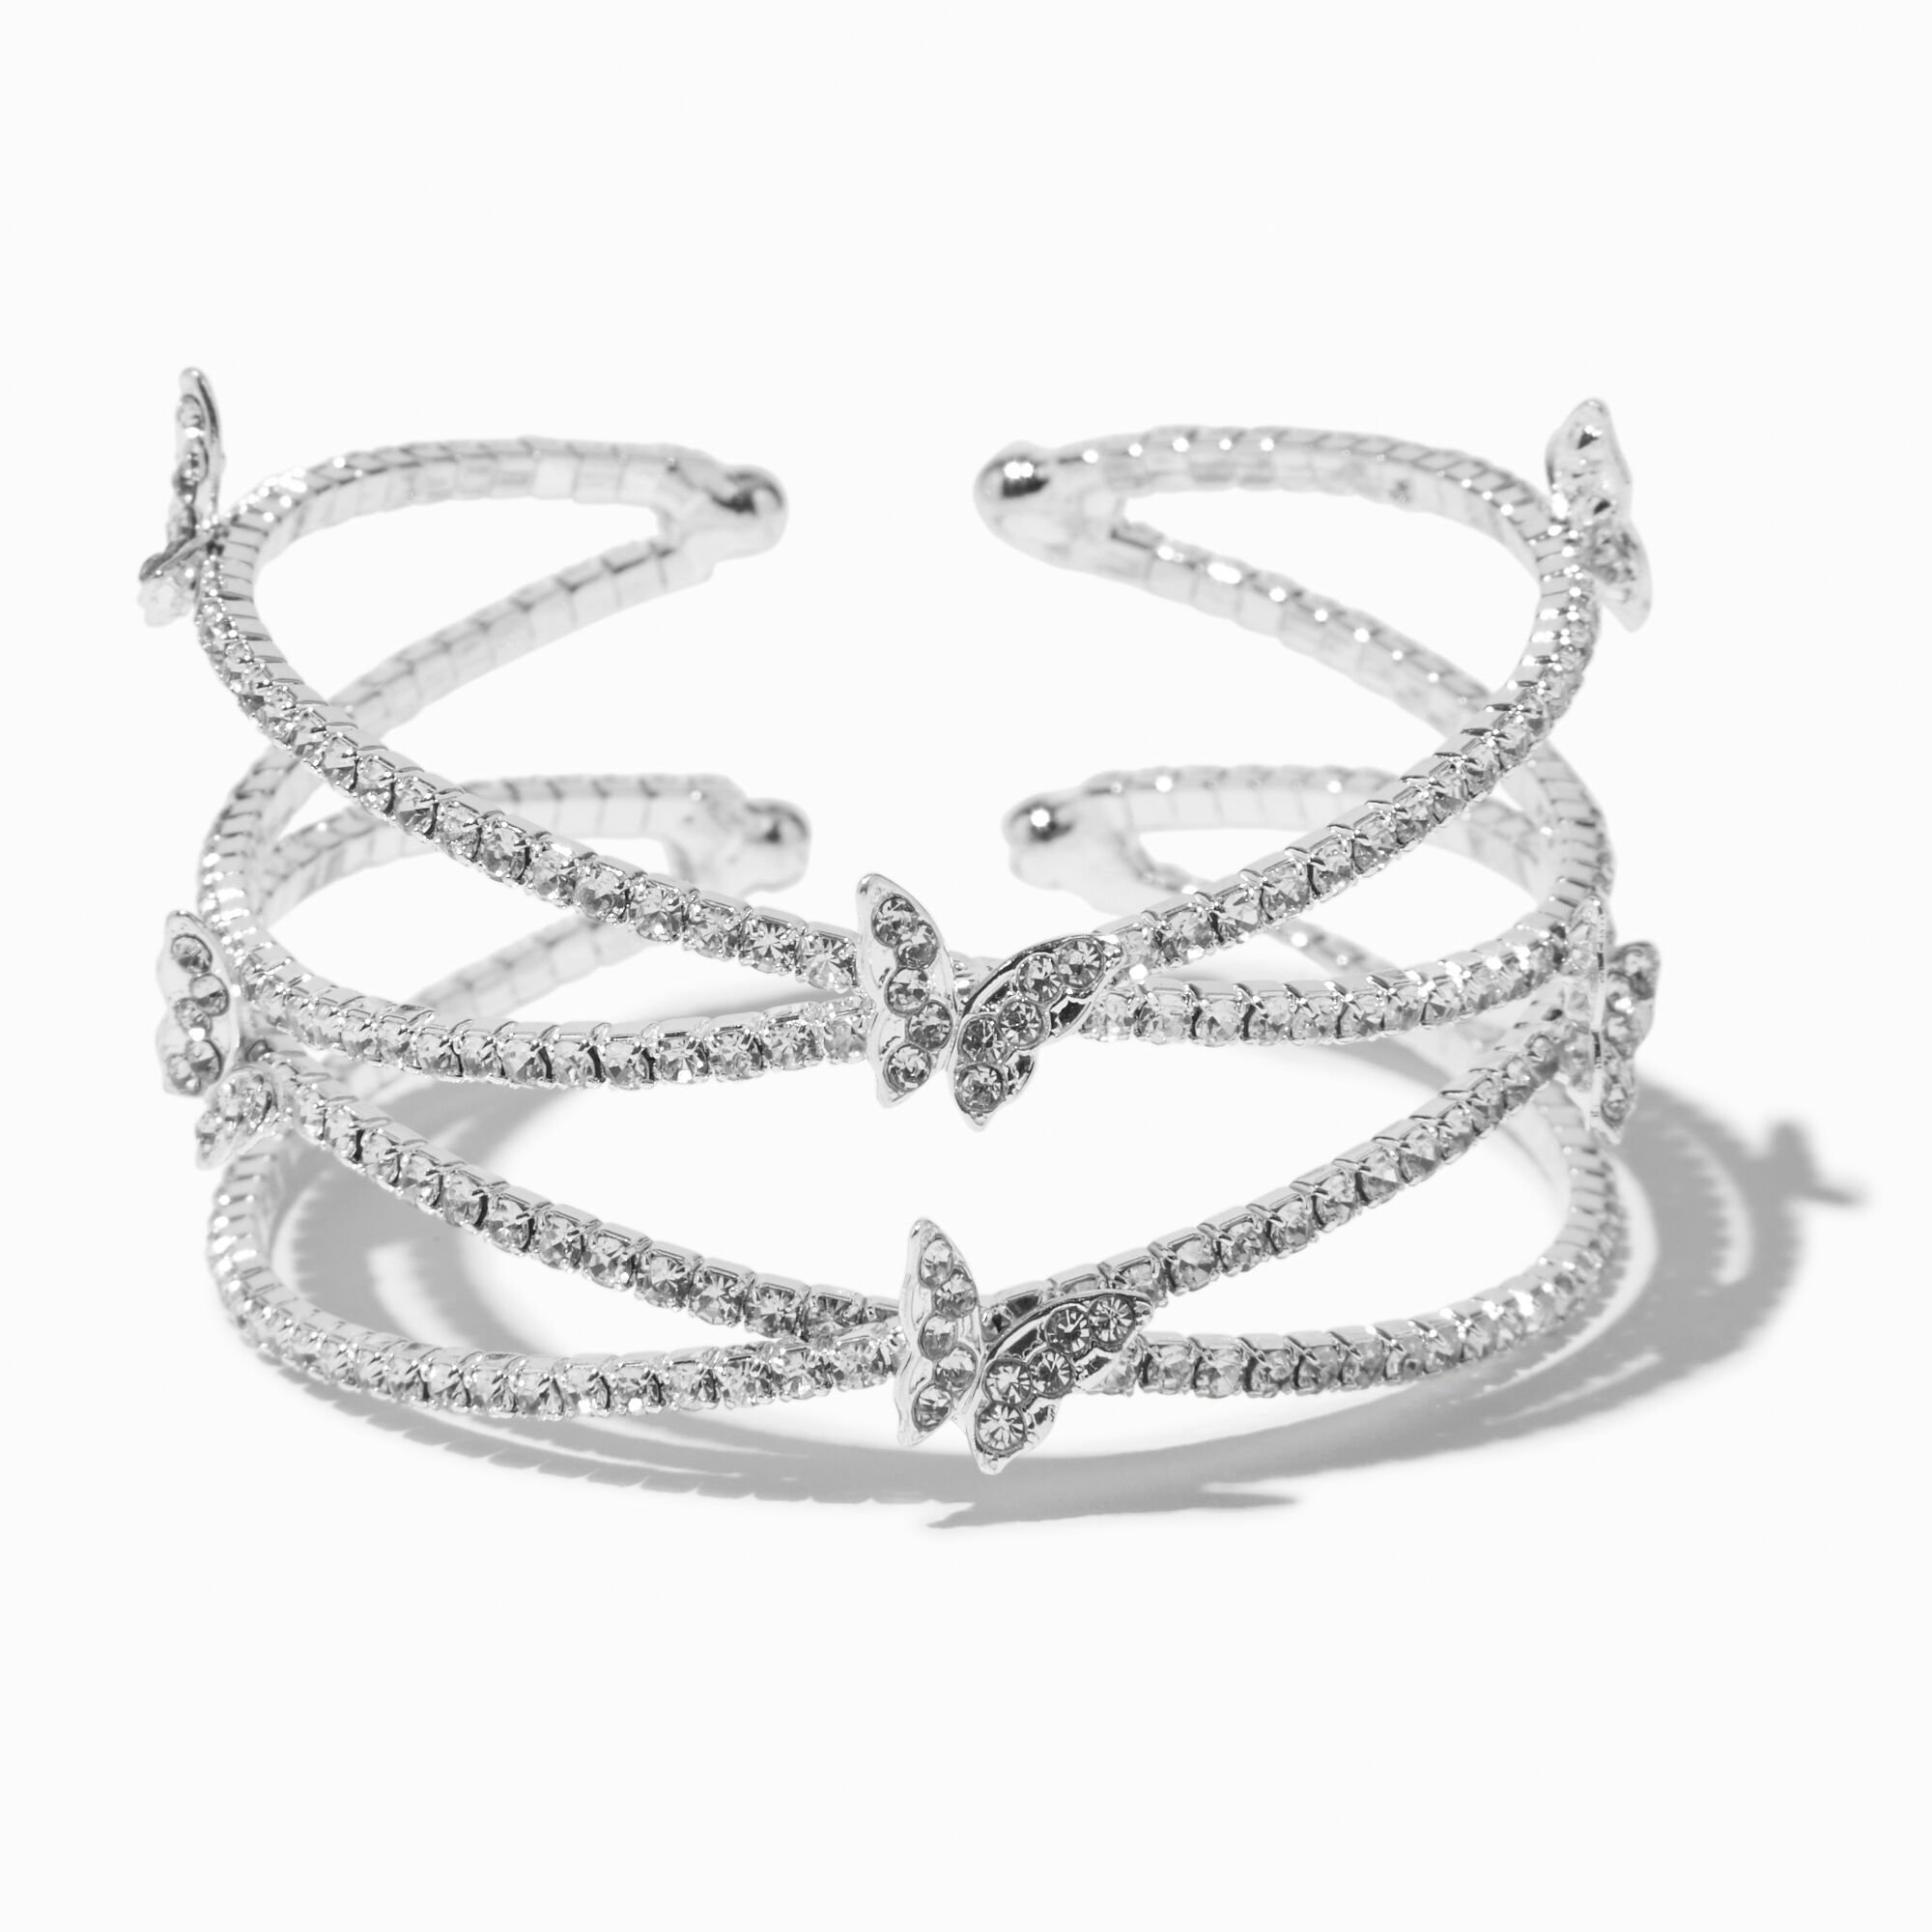 View Claires Rhinestone Butterfly Tone Criss Cross Cuff Bracelet Silver information